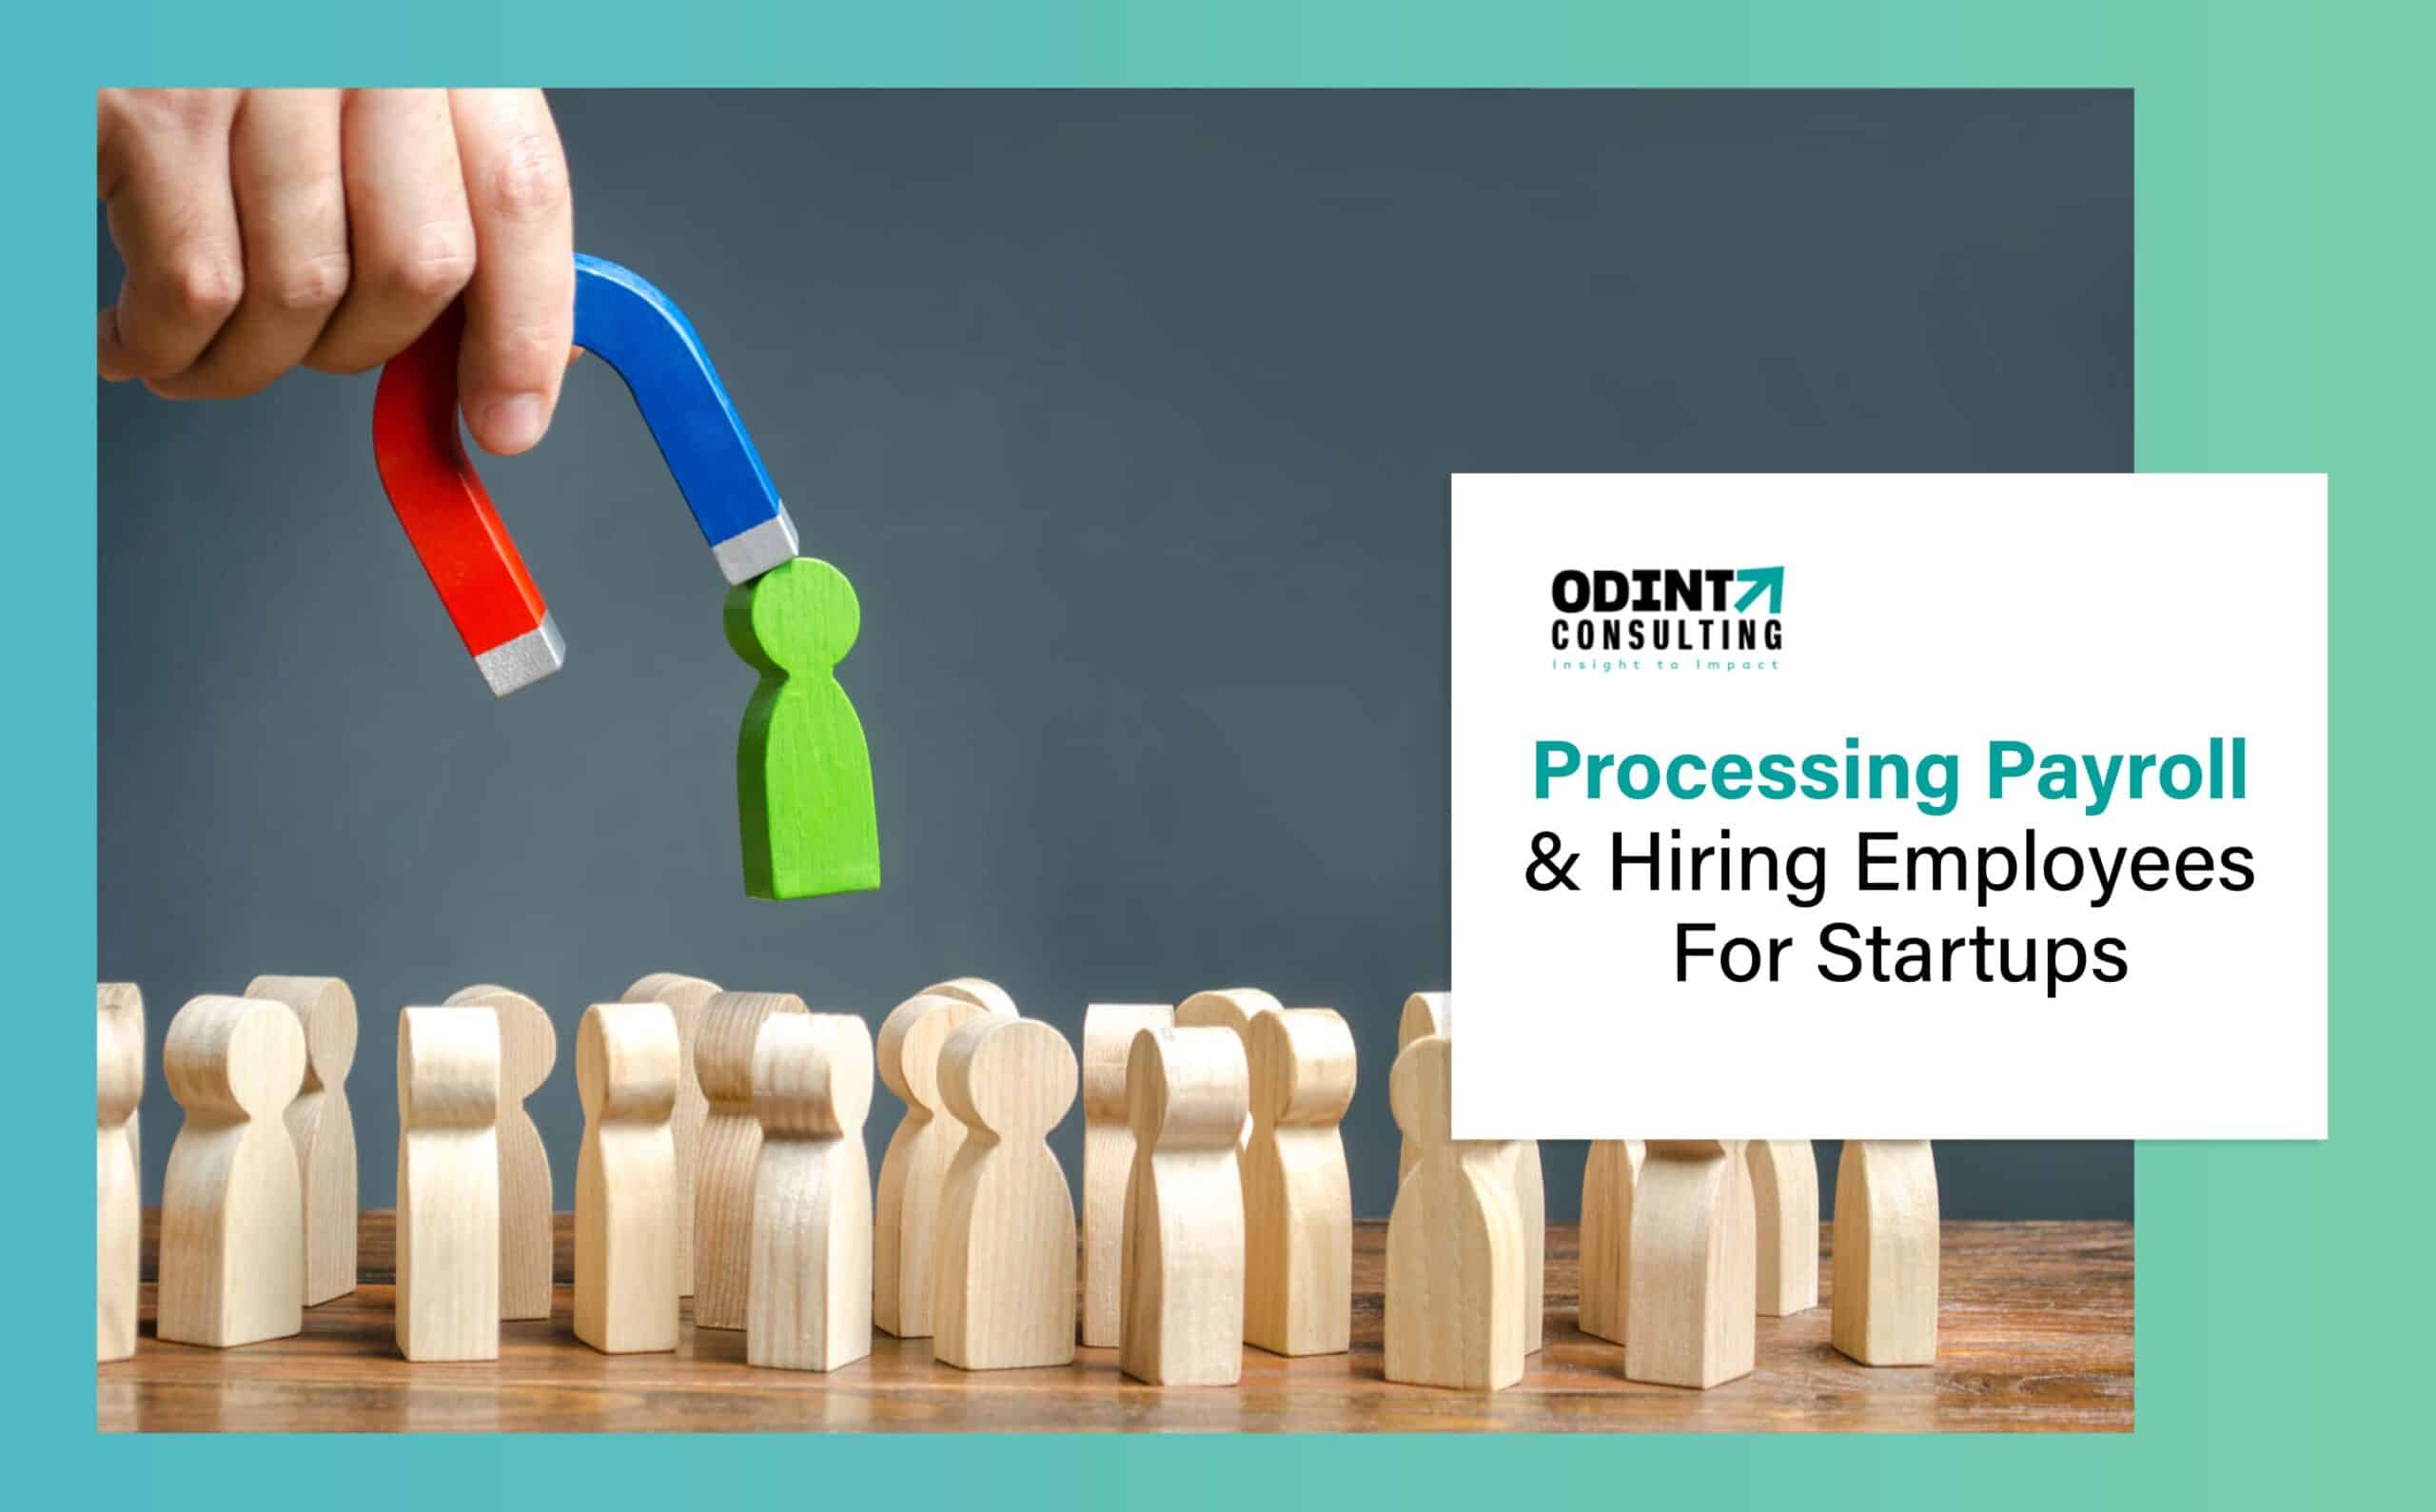 Processing Payroll And Hiring Employees For Startups: Instructions & Steps